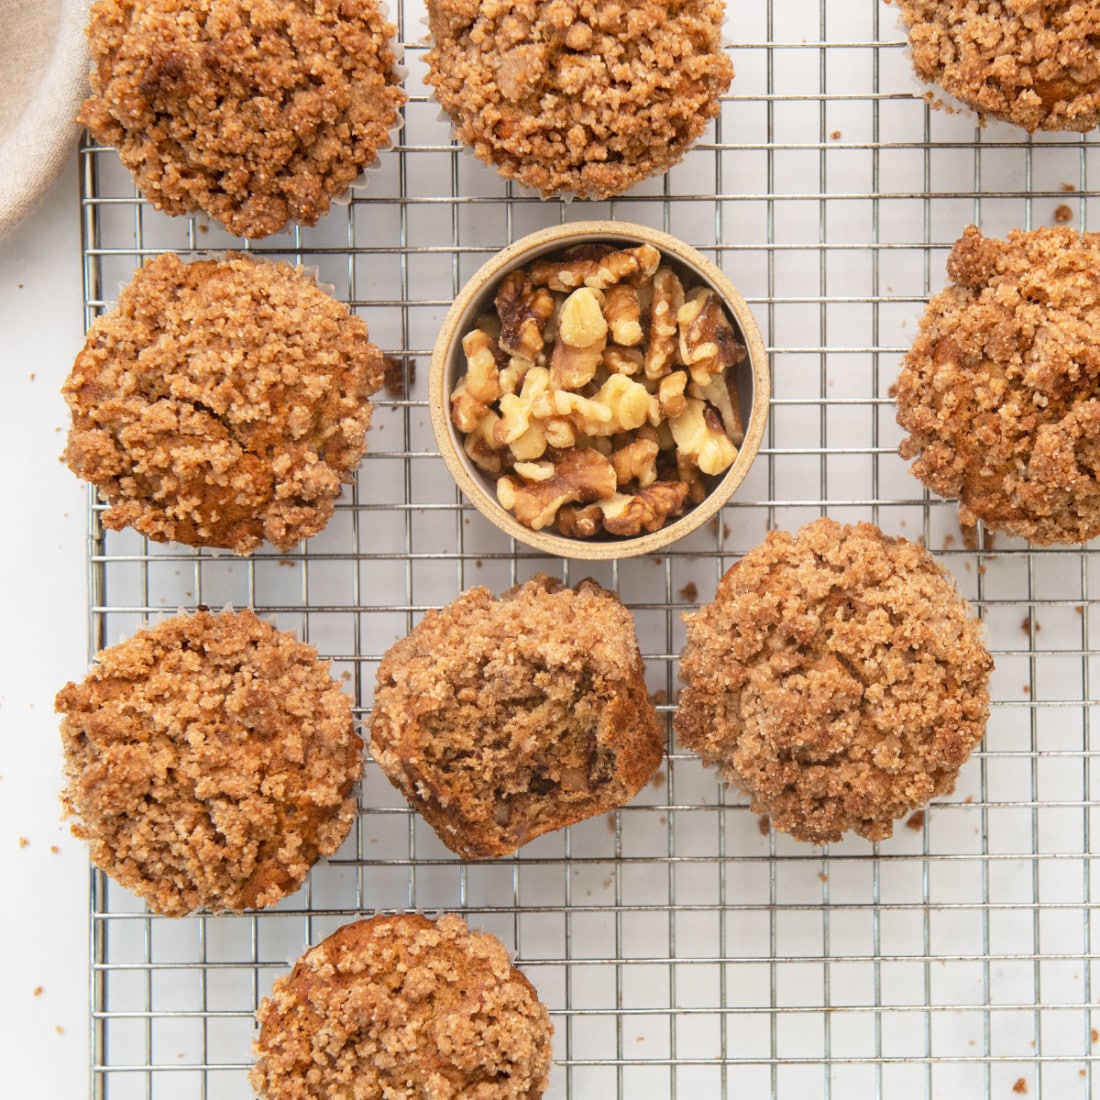 baked plant-based banana muffins with streusel topping cooling on a wire rack